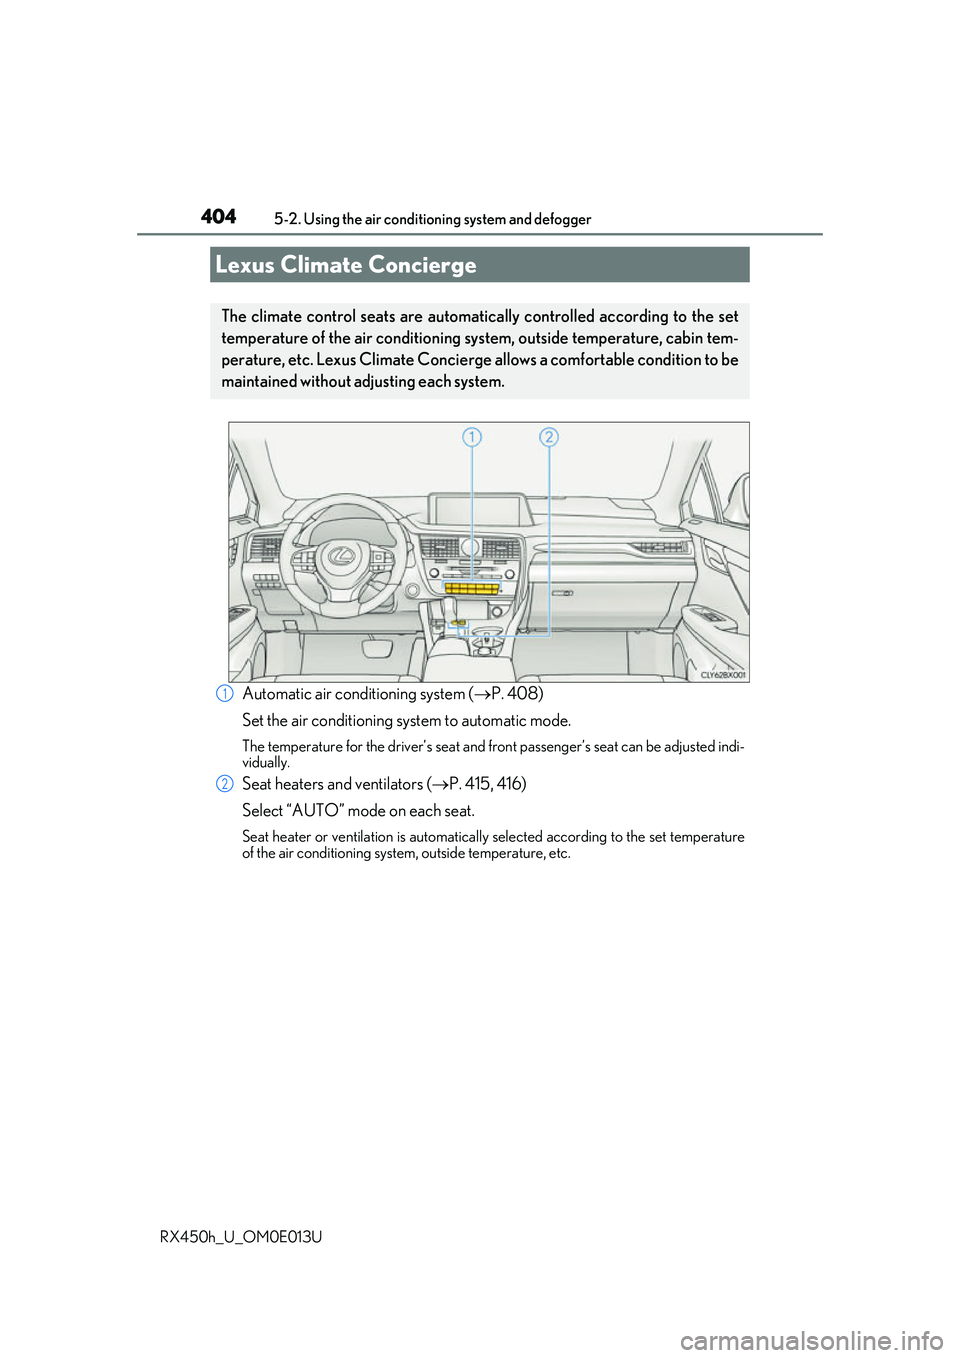 LEXUS RX450H 2016 Owners Guide 404
RX450h_U_OM0E013U5-2. Using the air conditio
ning system and defogger
Automatic air conditioning system ( P. 408) 
Set the air conditioning system to automatic mode.
The temperature for the dri